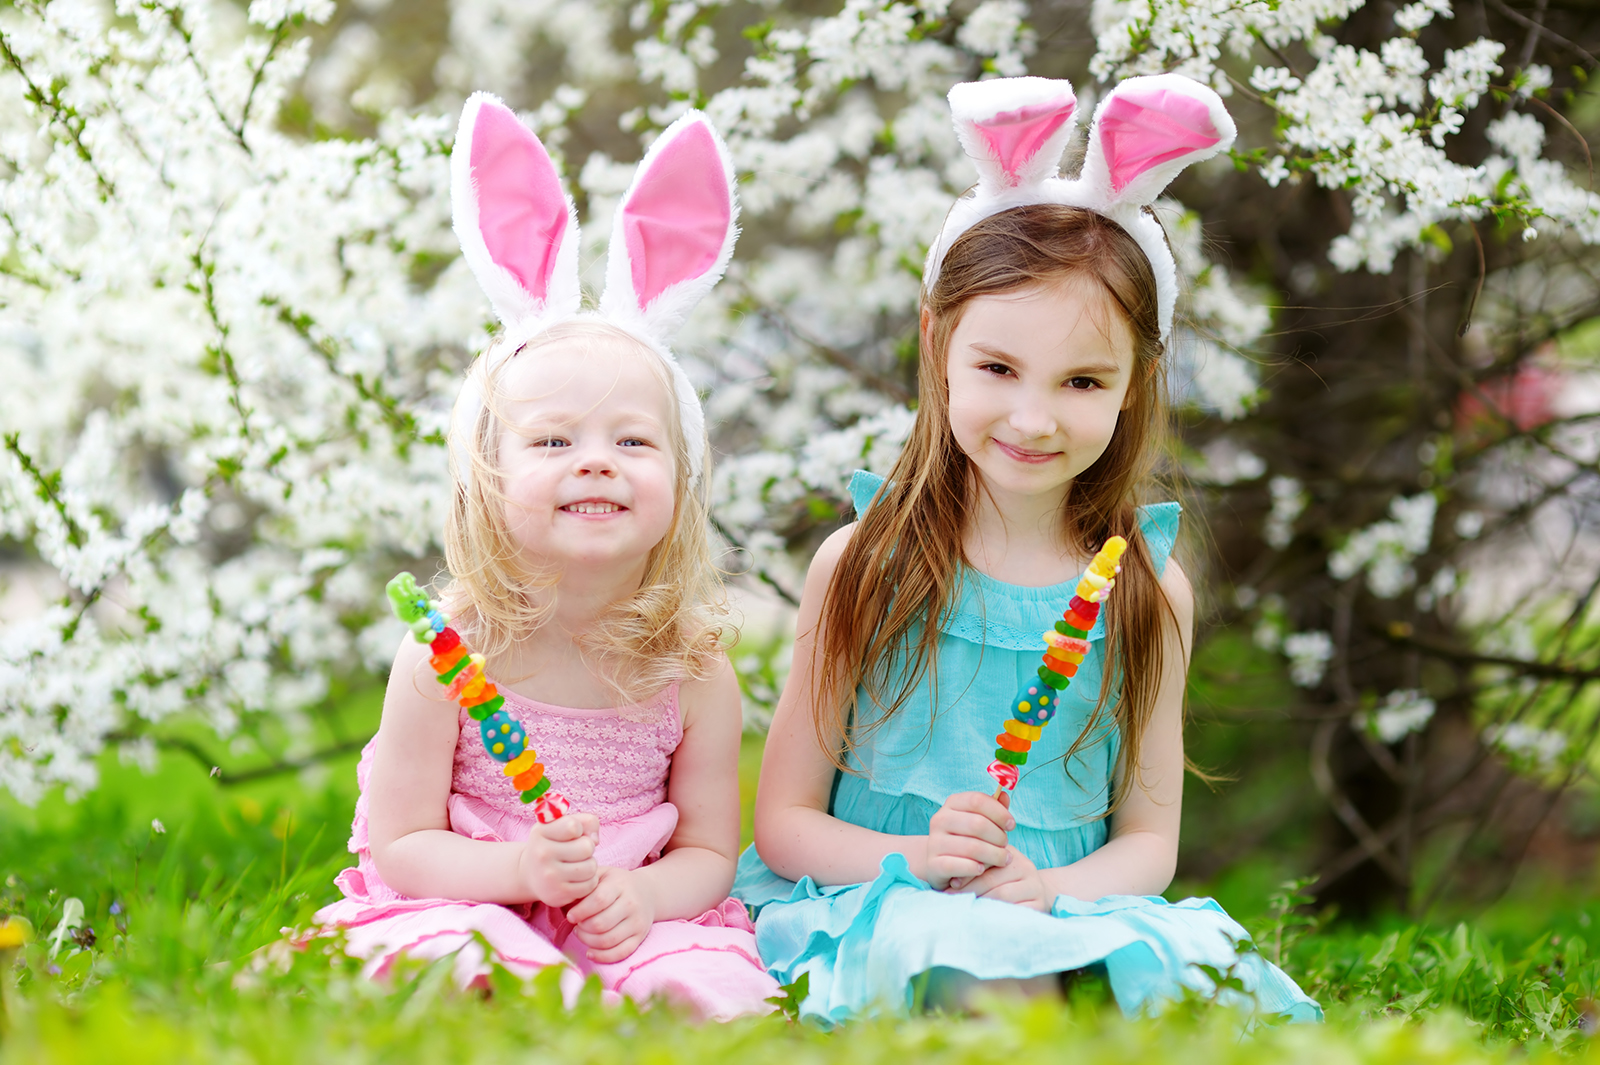 Ask Your Dentist: How to Choose Easter Candy for Better Dental Health